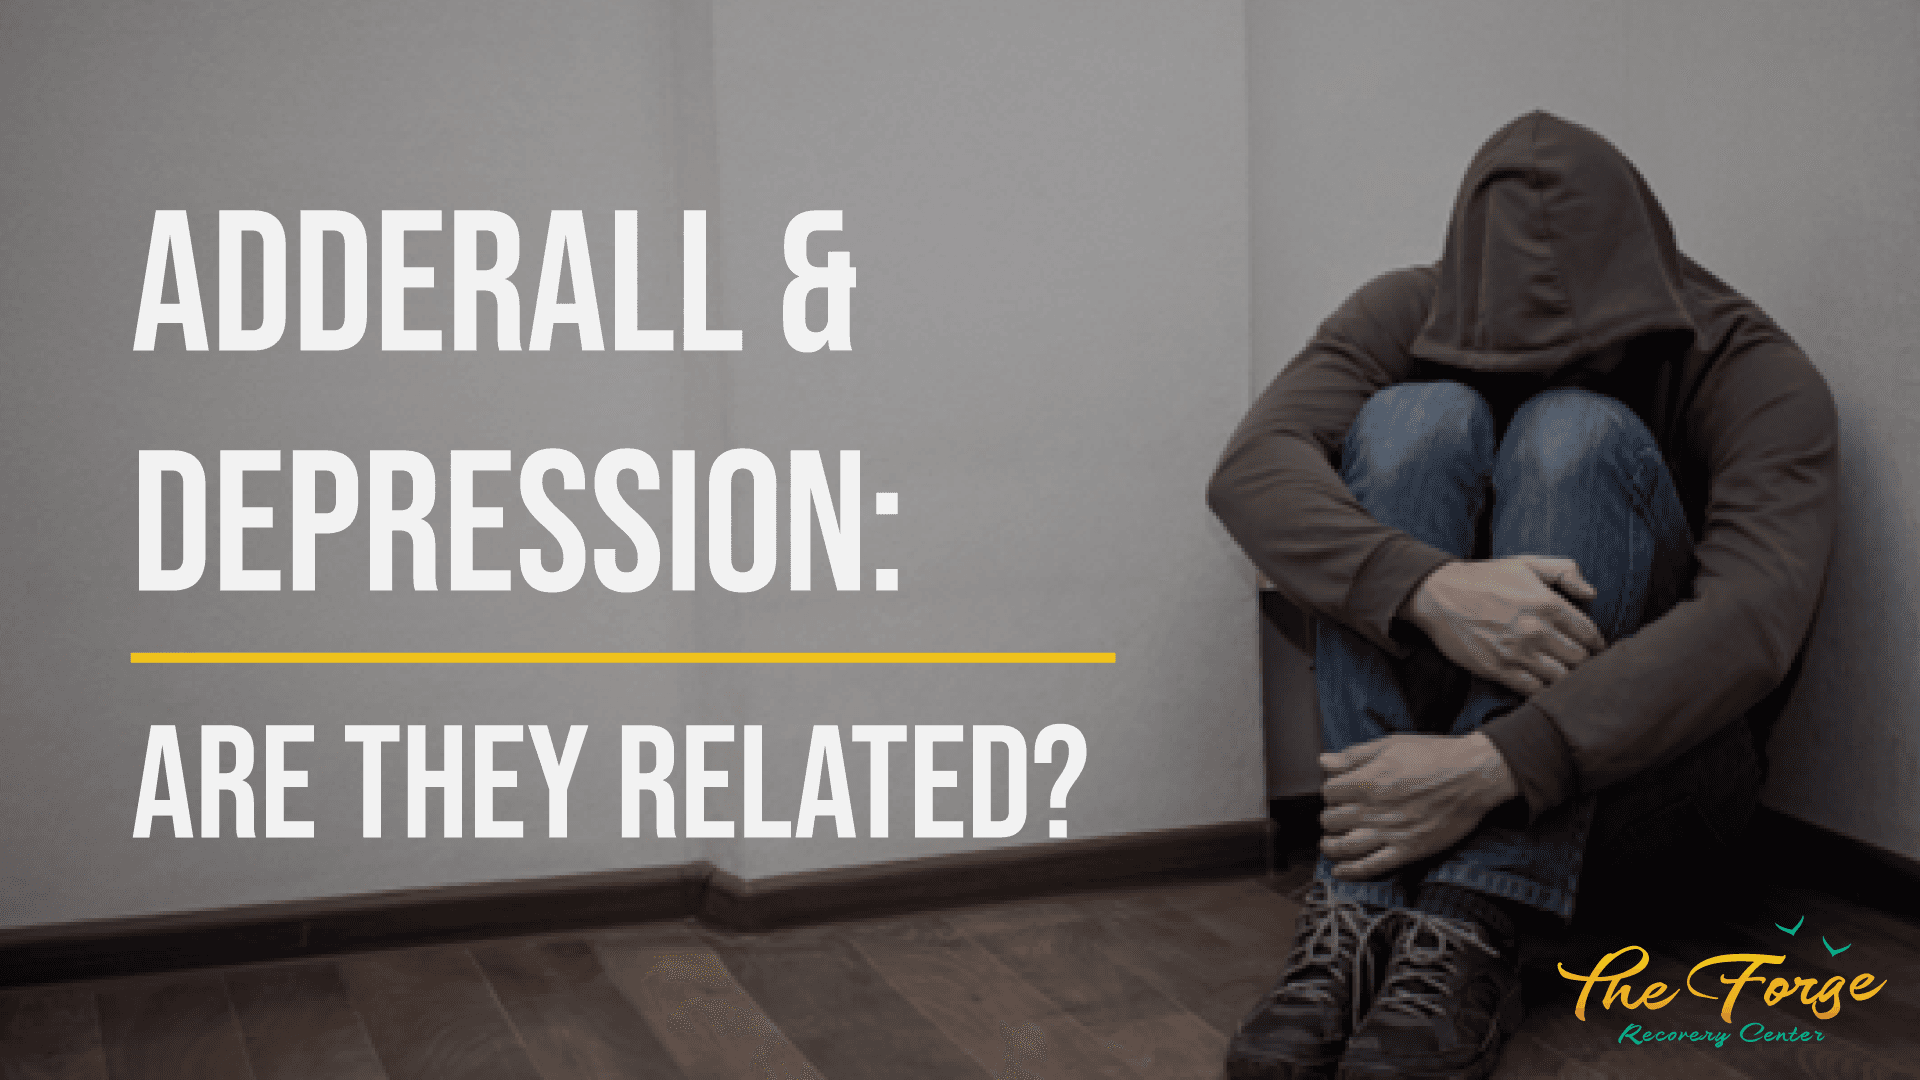 Adderall & Depression: Are They Related?